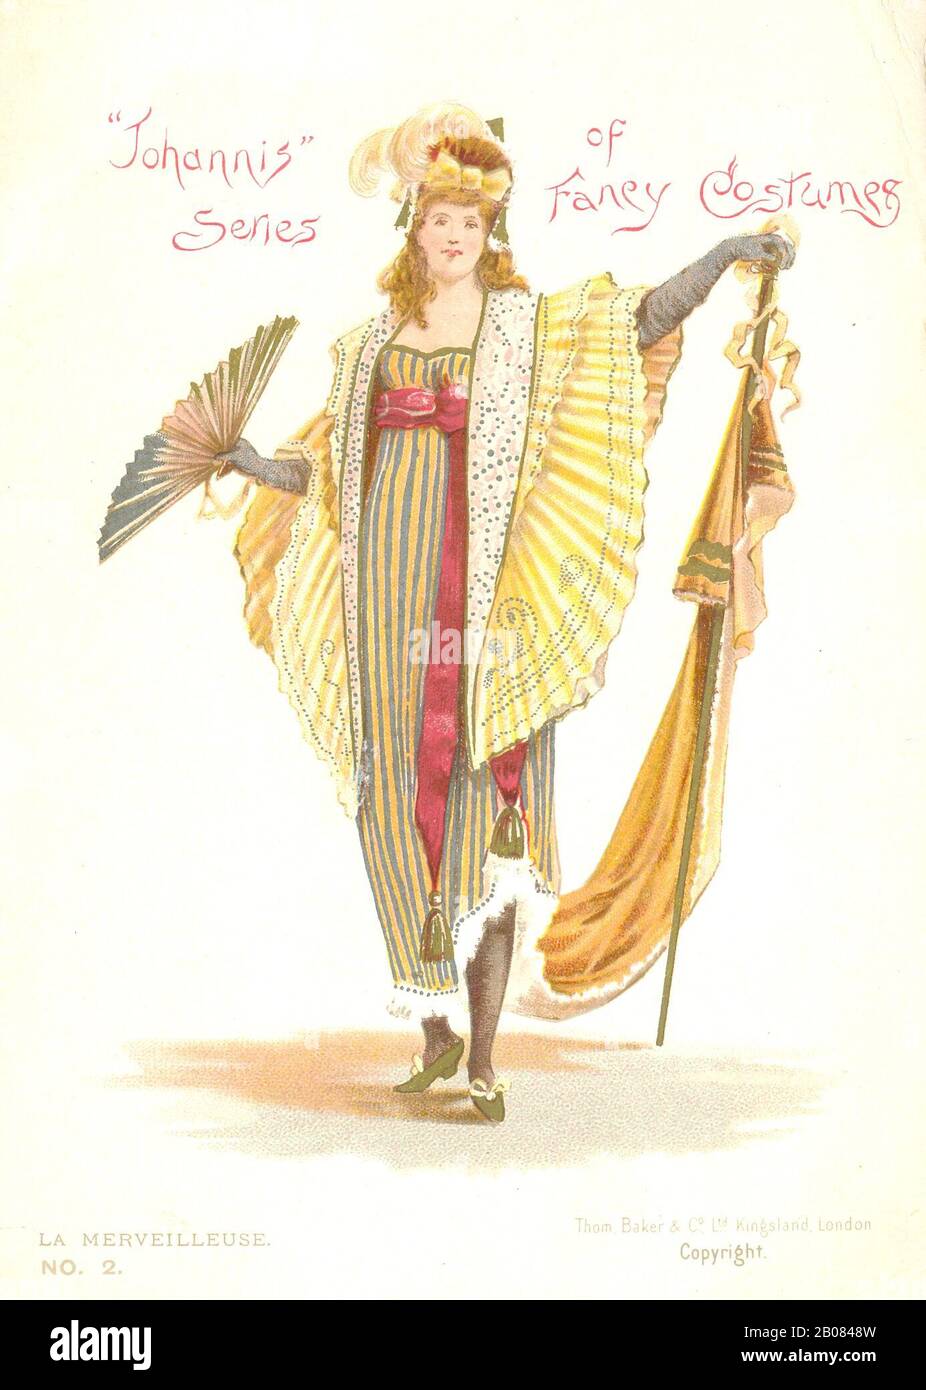 La Merveilleuse No. 2 in set of 'Johannis' Series of Fancy Costumes a give away card advertising 'Johannis' palatable water 1884 Stock Photo